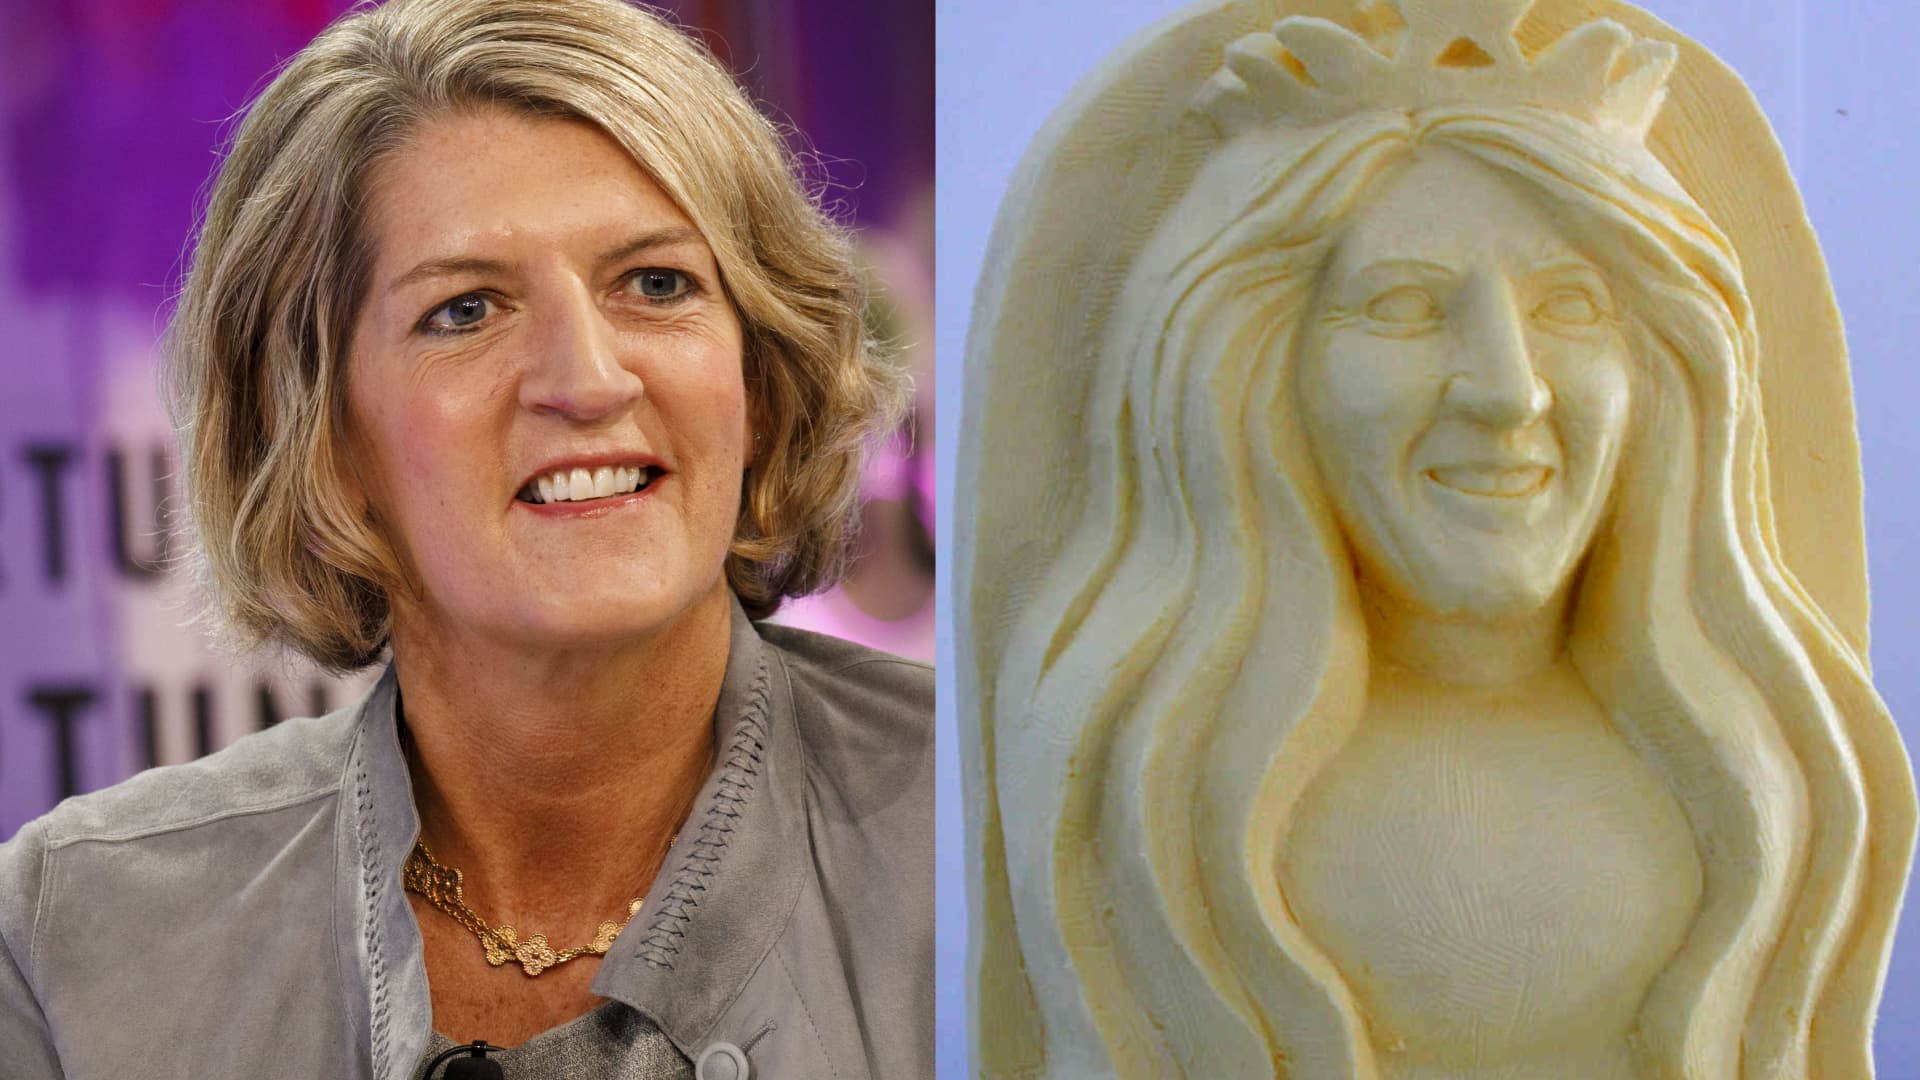 Beth Ford, chief executive officer of Land O'Lakes Inc. (L), and a butter sculpture of land o'lakes her.